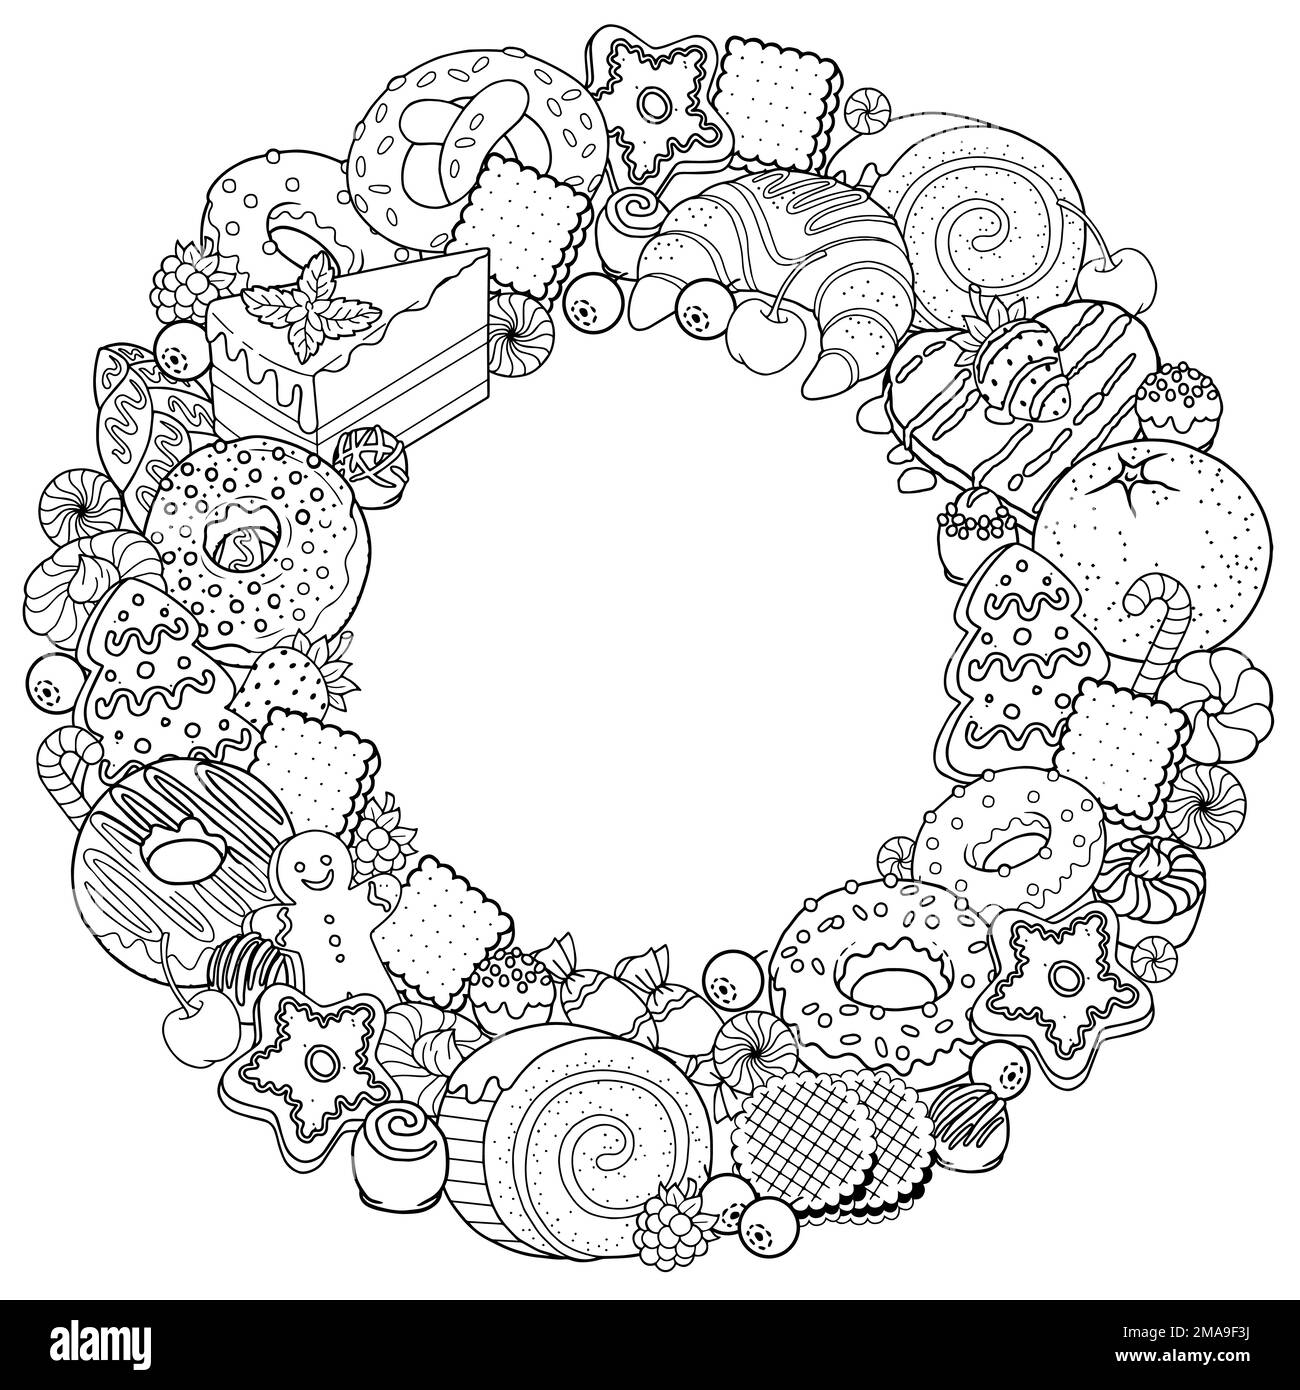 Vector coloring book page for adults. Black and white illustration of sweet food, candies, pastries, desserts, baked products Stock Vector